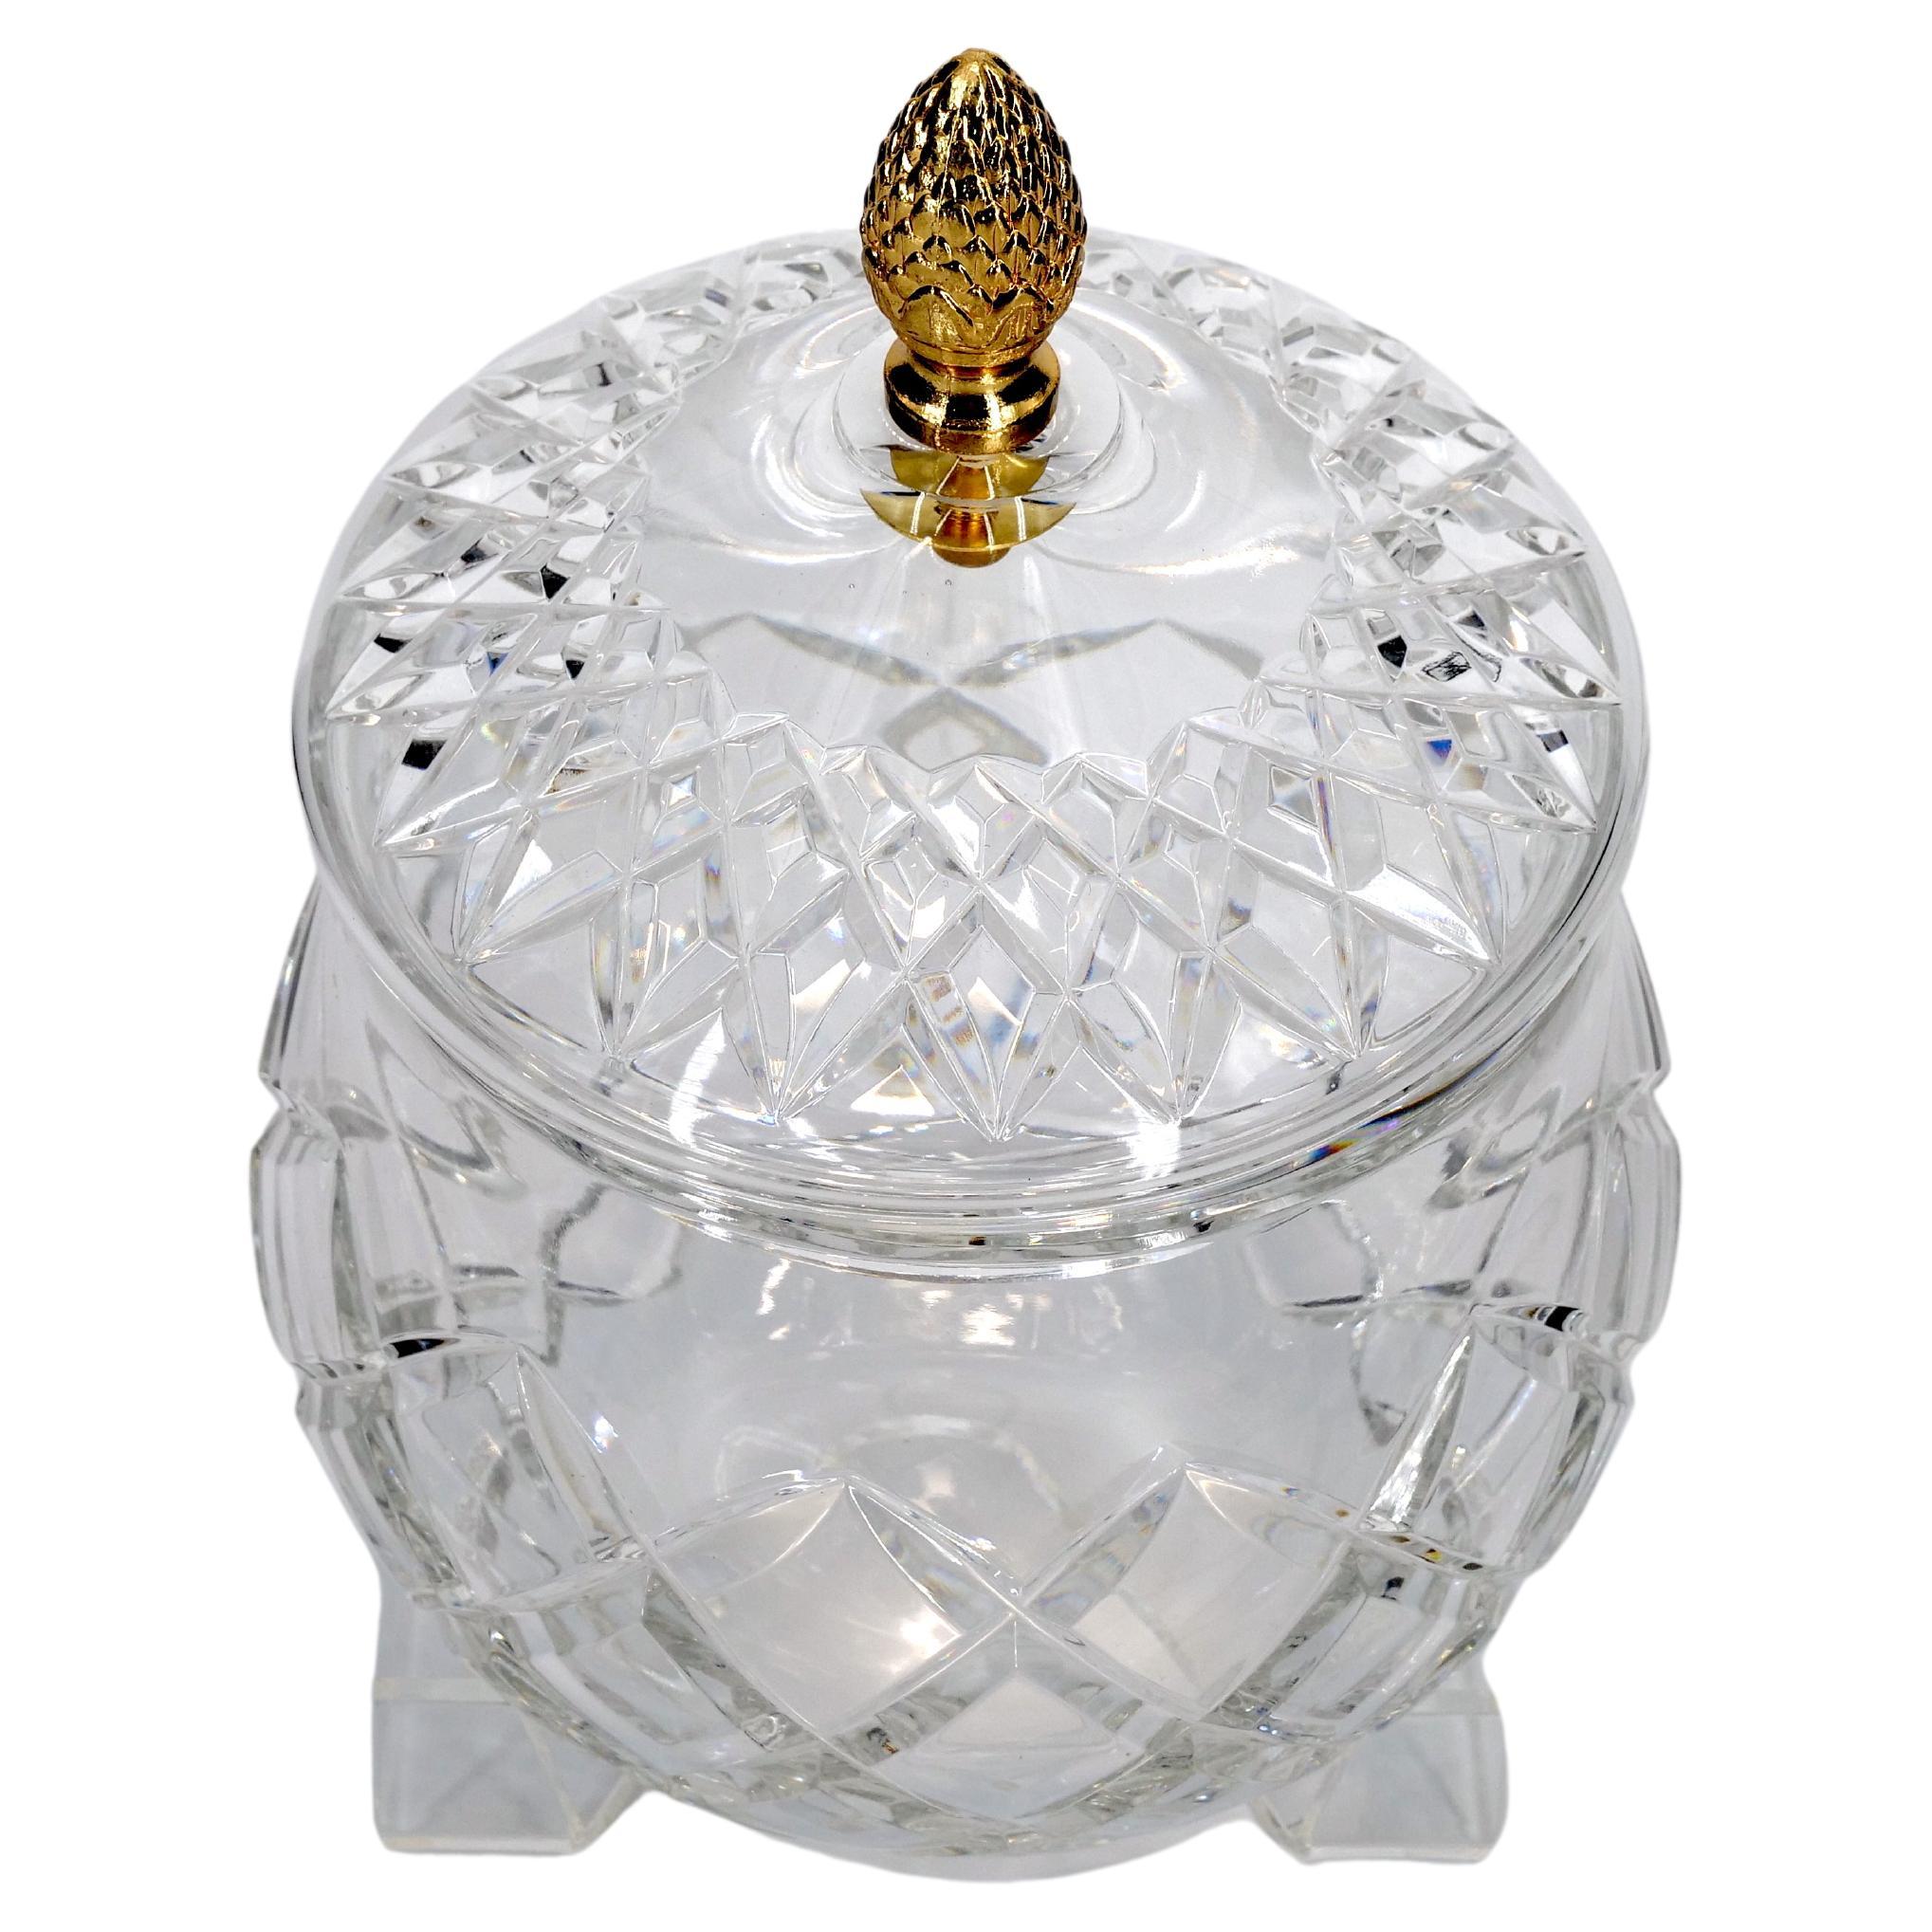 Gilt French Cut Crystal / Brass Covered Finial Serving Piece